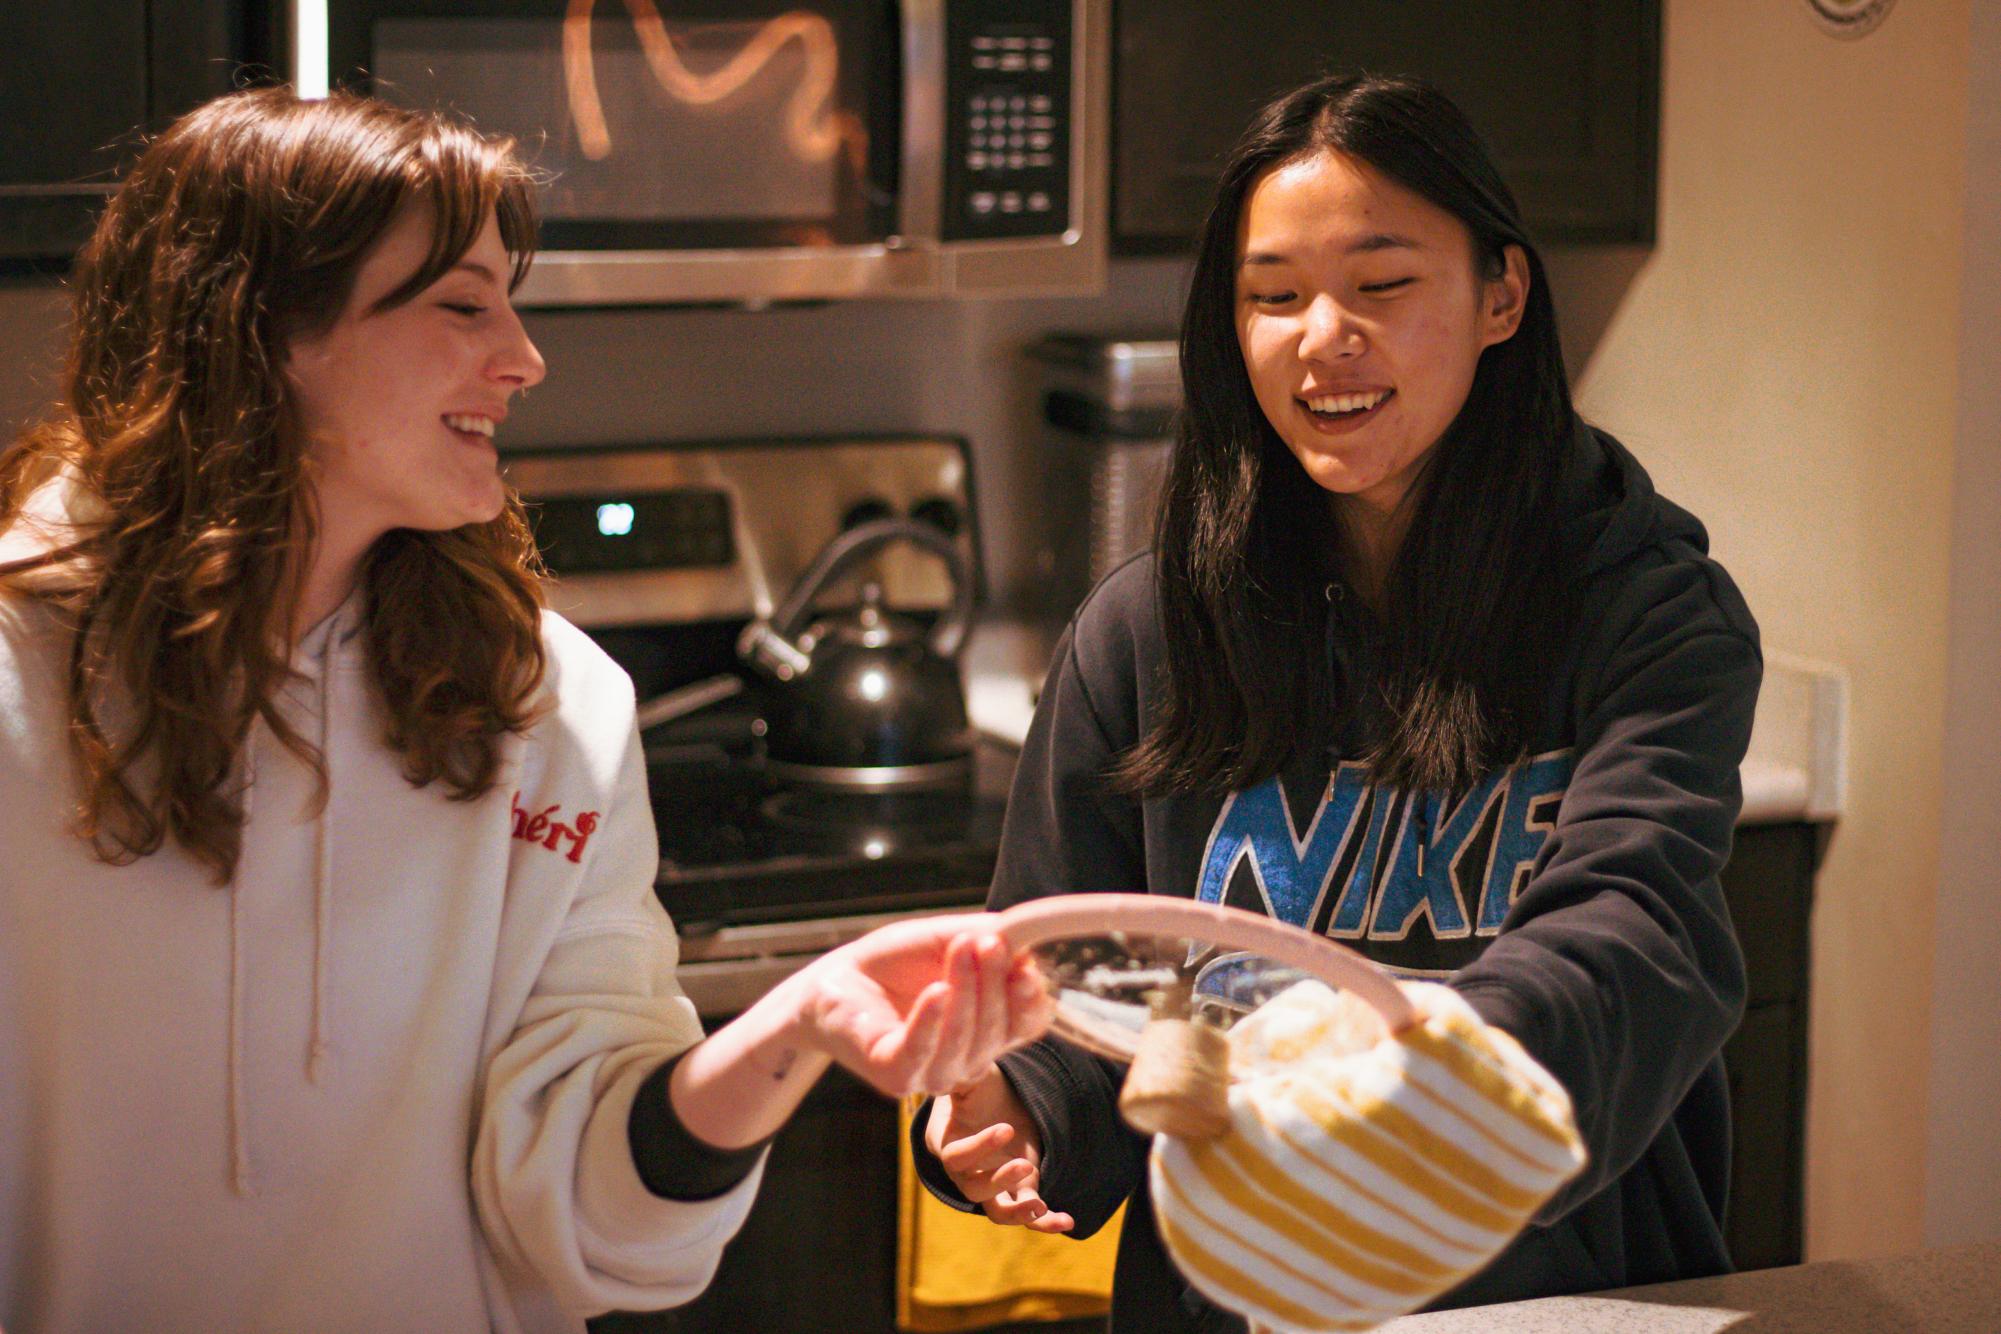 ayton Cowan (she/her) (left) and her partner Jordan Espina (she/they) clean dishes in their home in Corvallis on Jan. 13.
